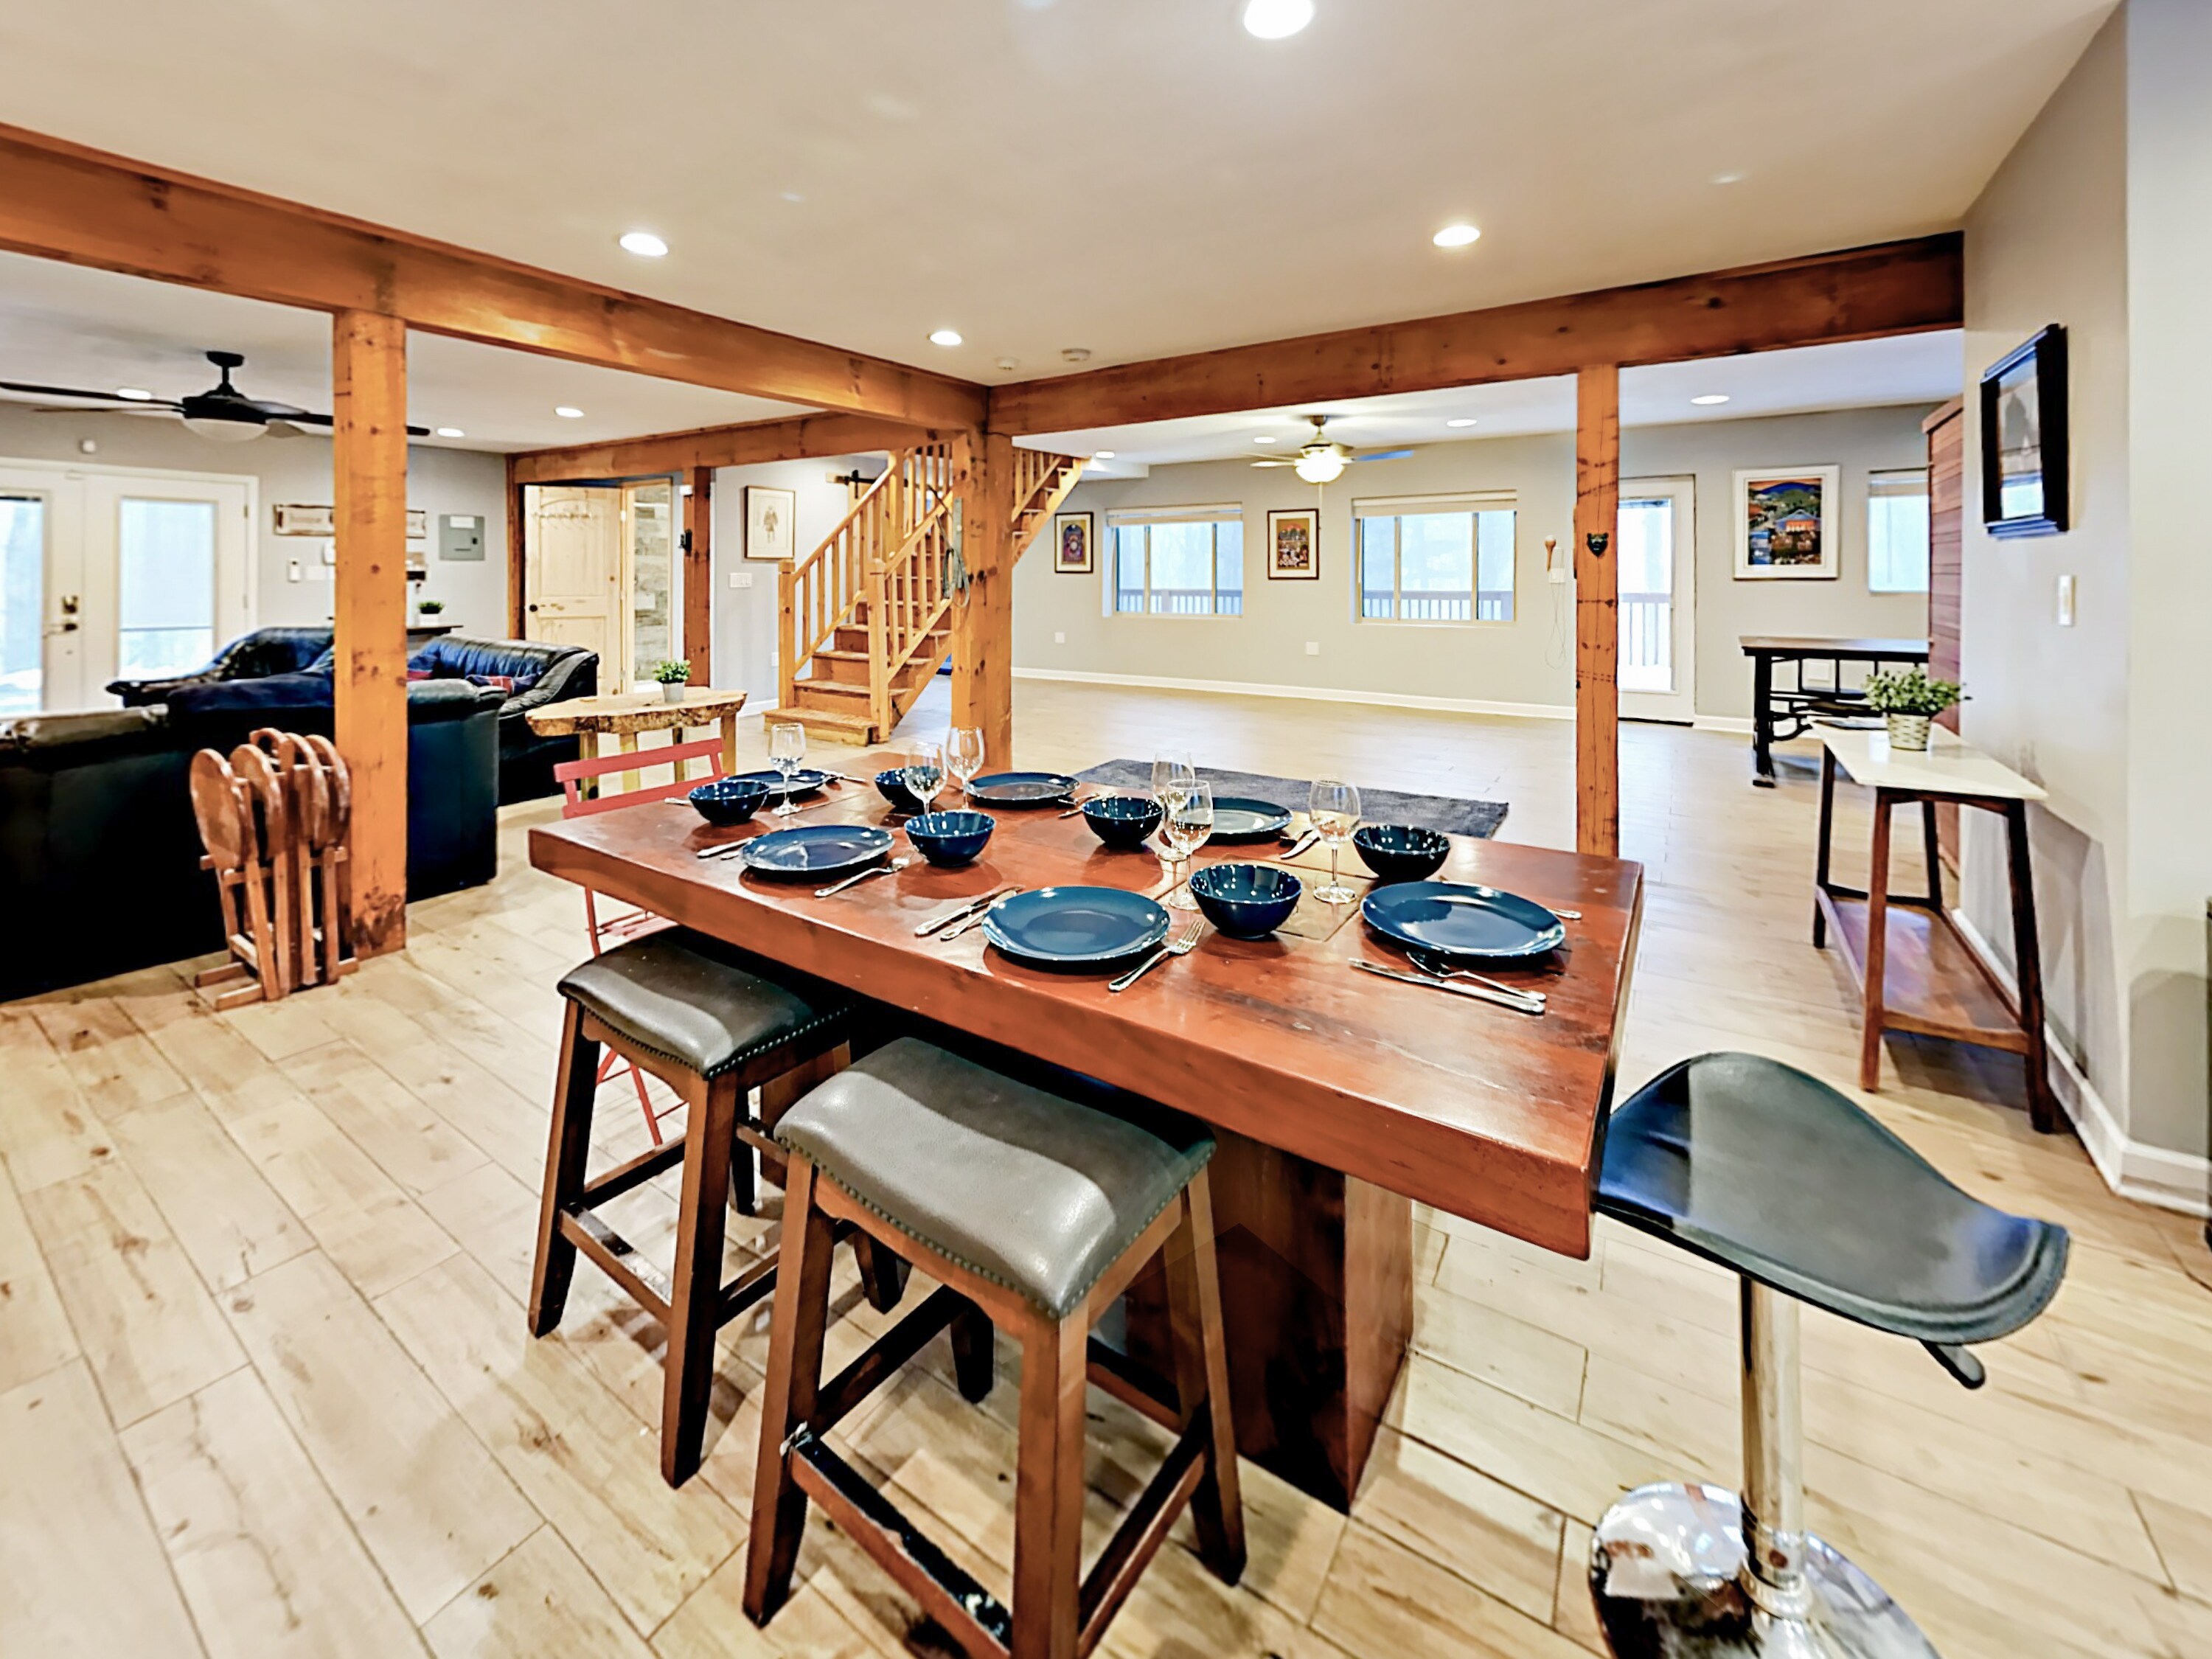 When it's time to eat, gather around the 6-person dining table for family meals.